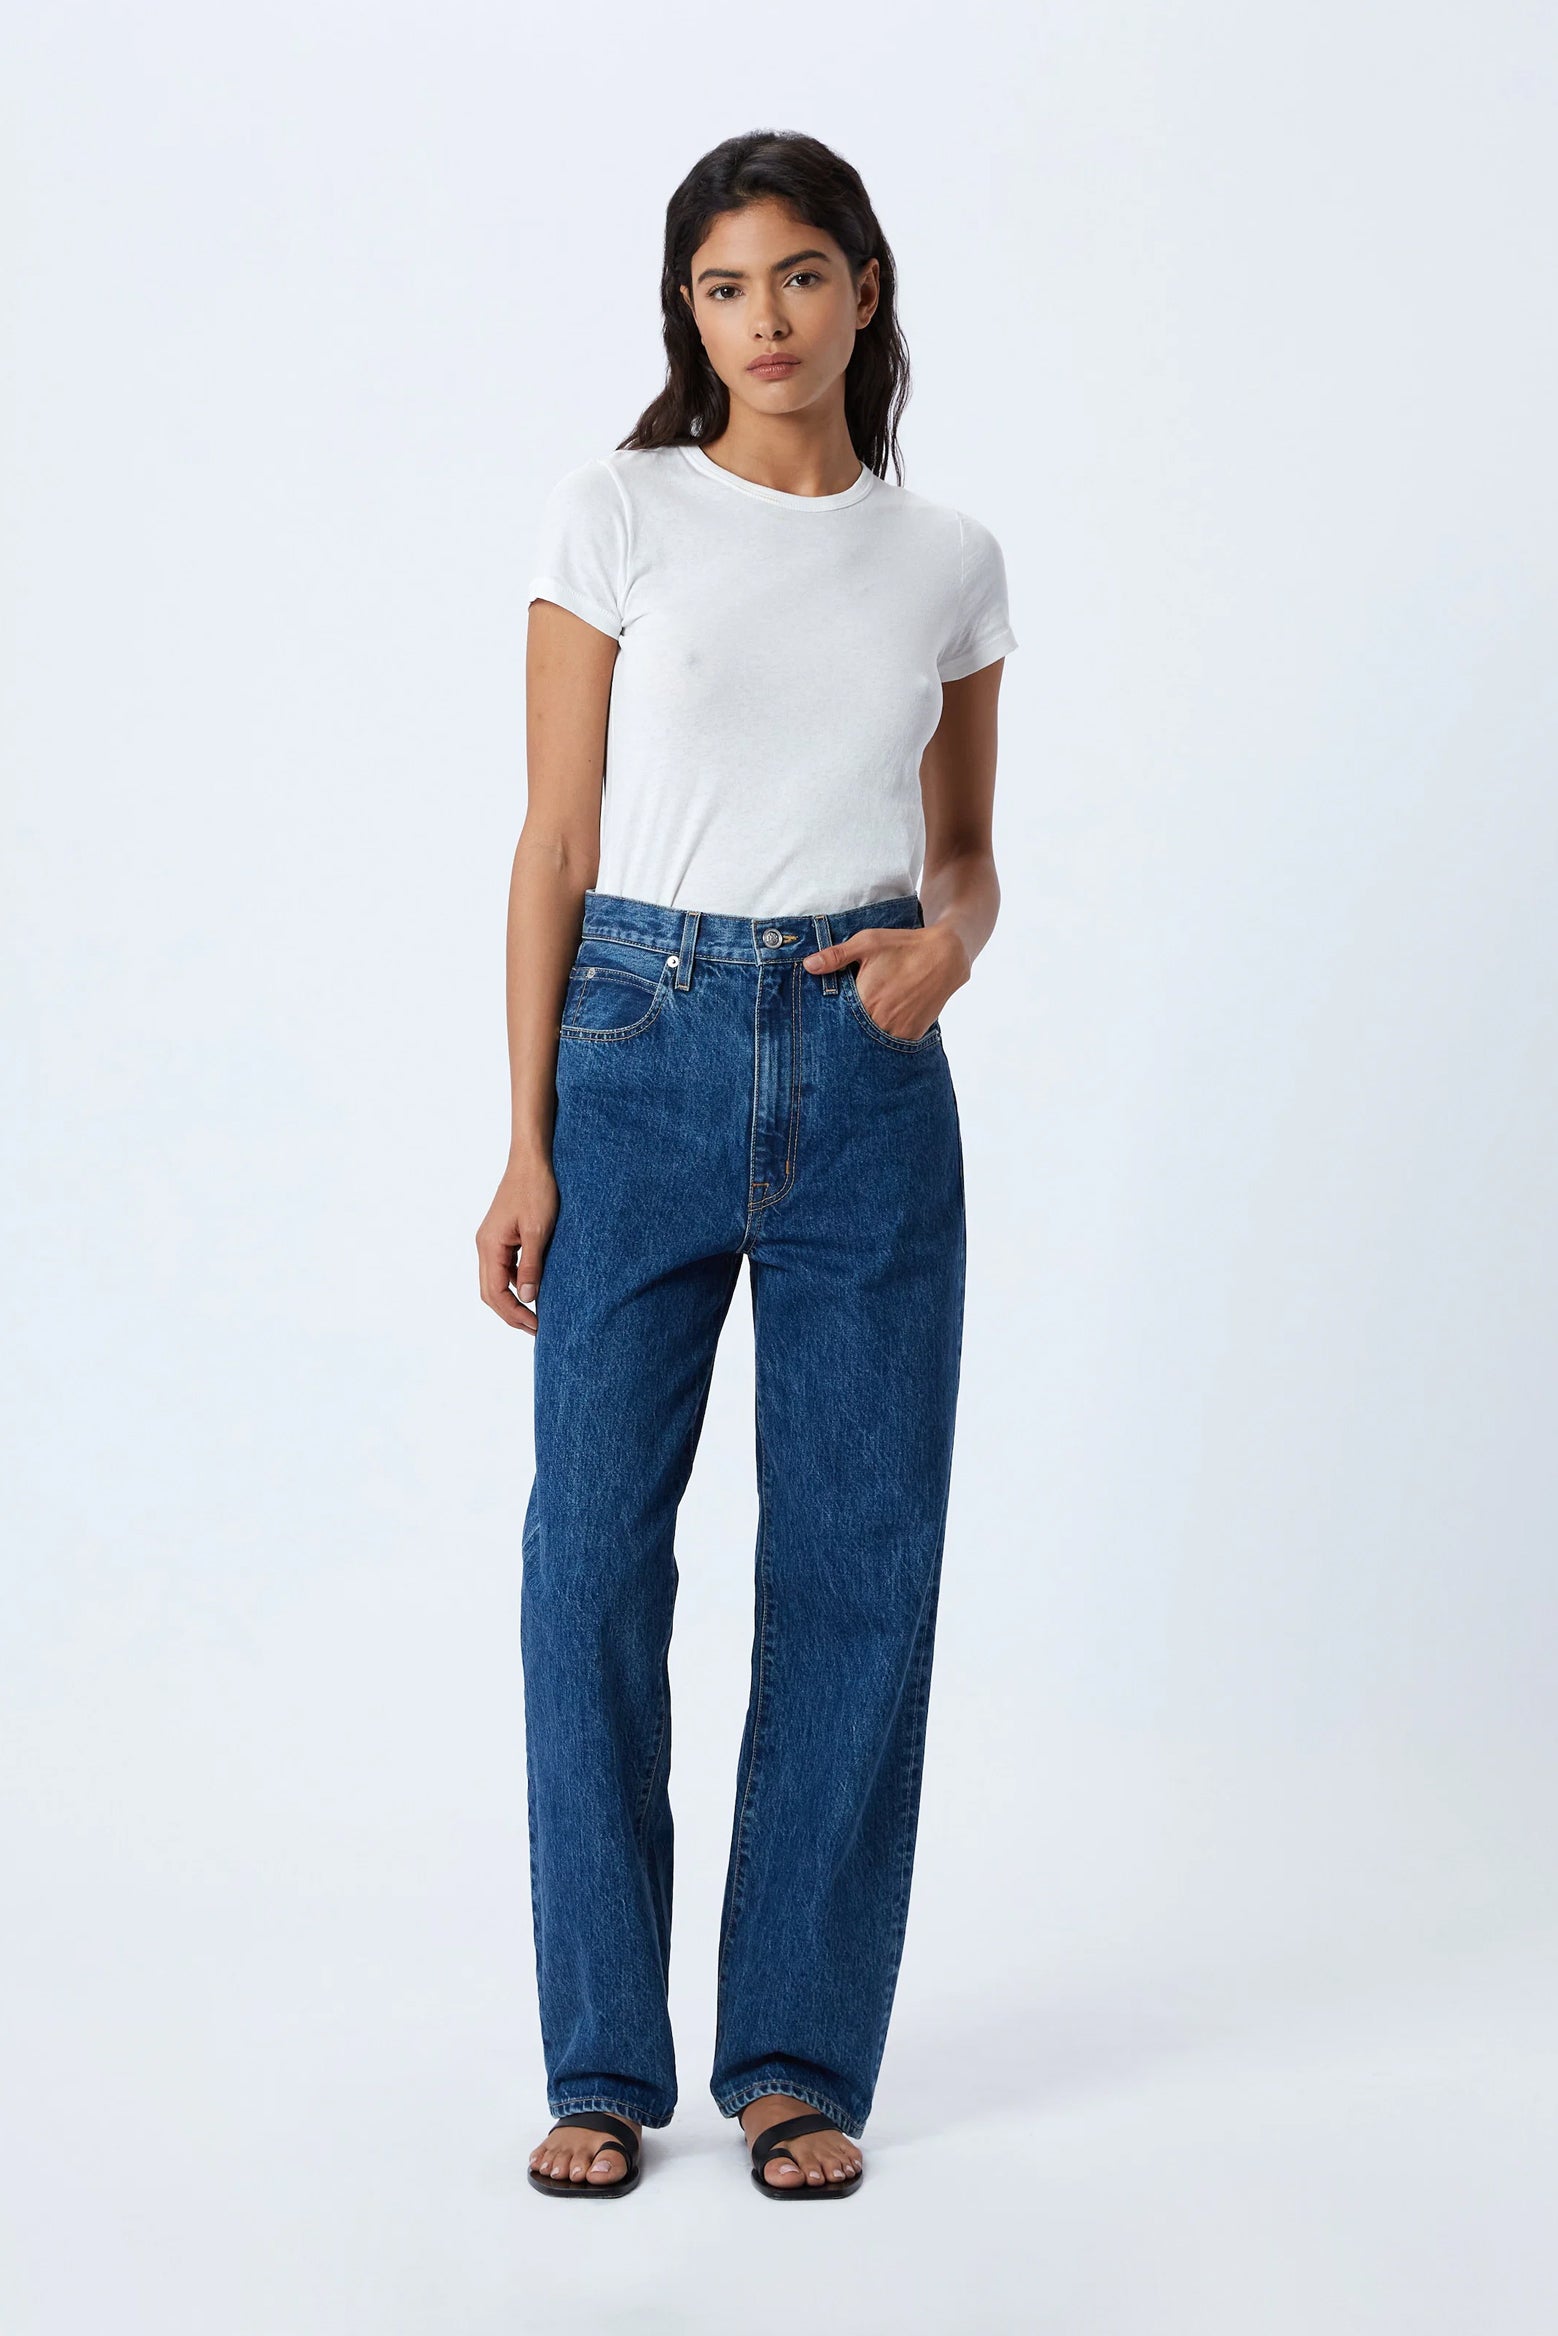 ASOS DESIGN high waisted double tie pants in light brown